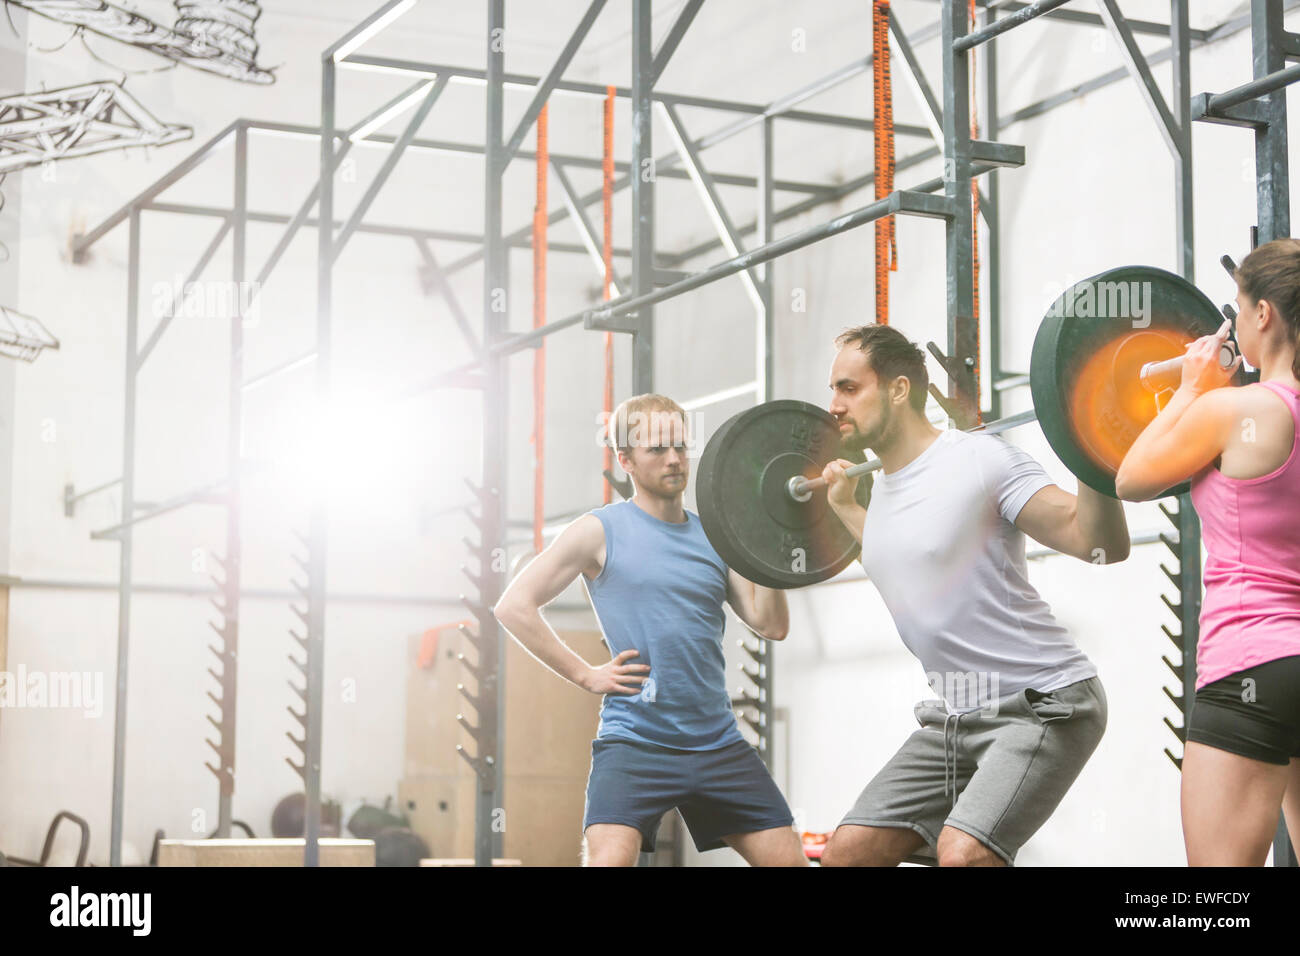 People assisting man in lifting barbell at crossfit gym Stock Photo